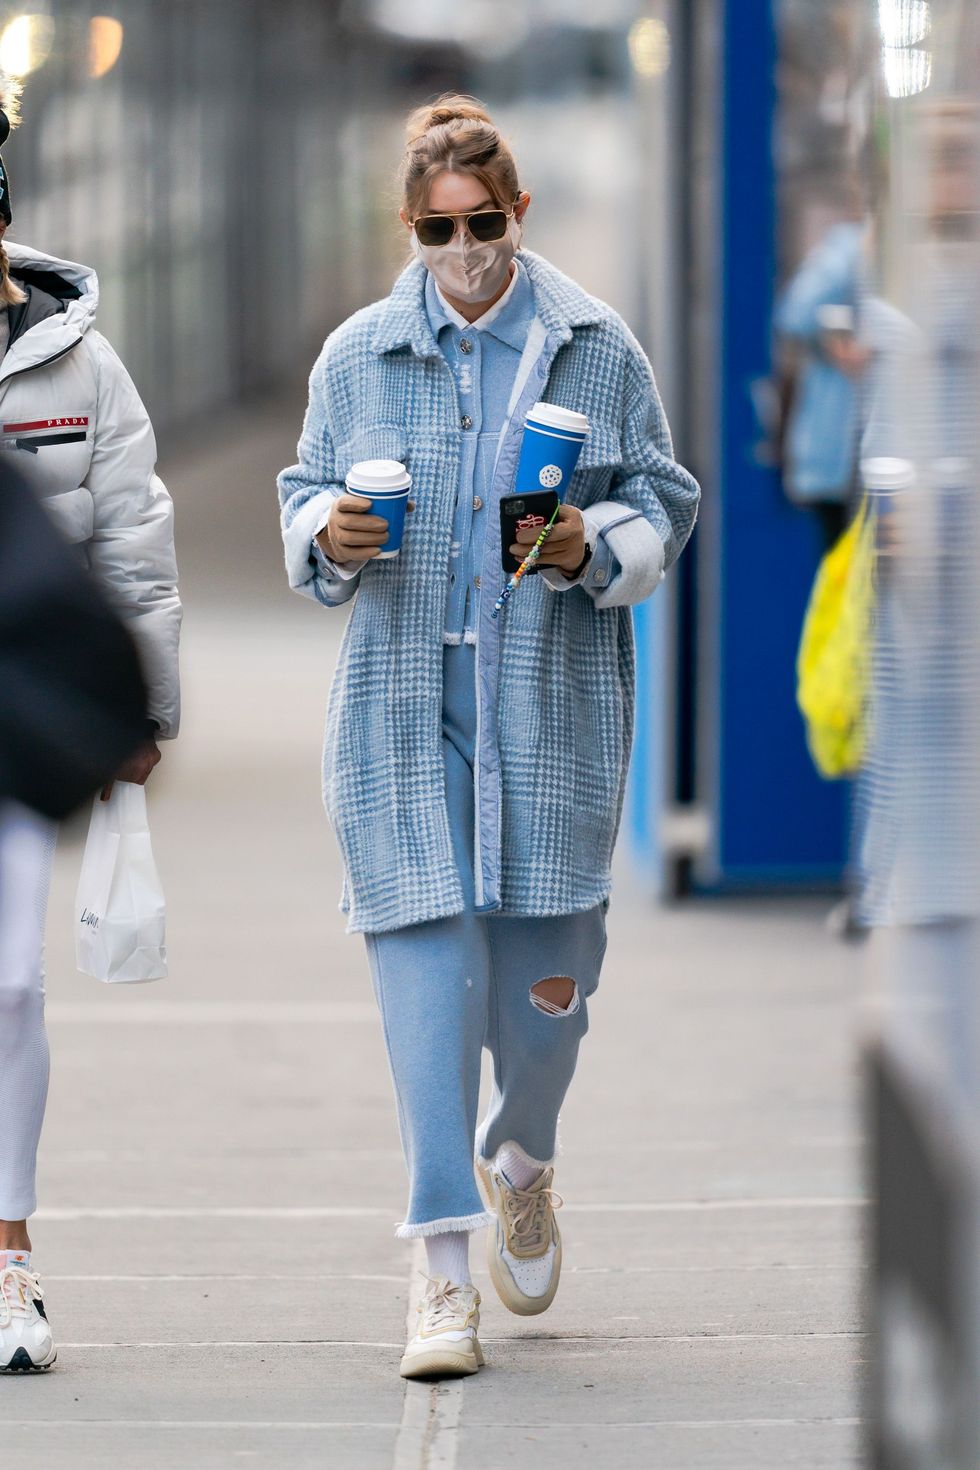 Gigi Hadid takes the streets in blue.